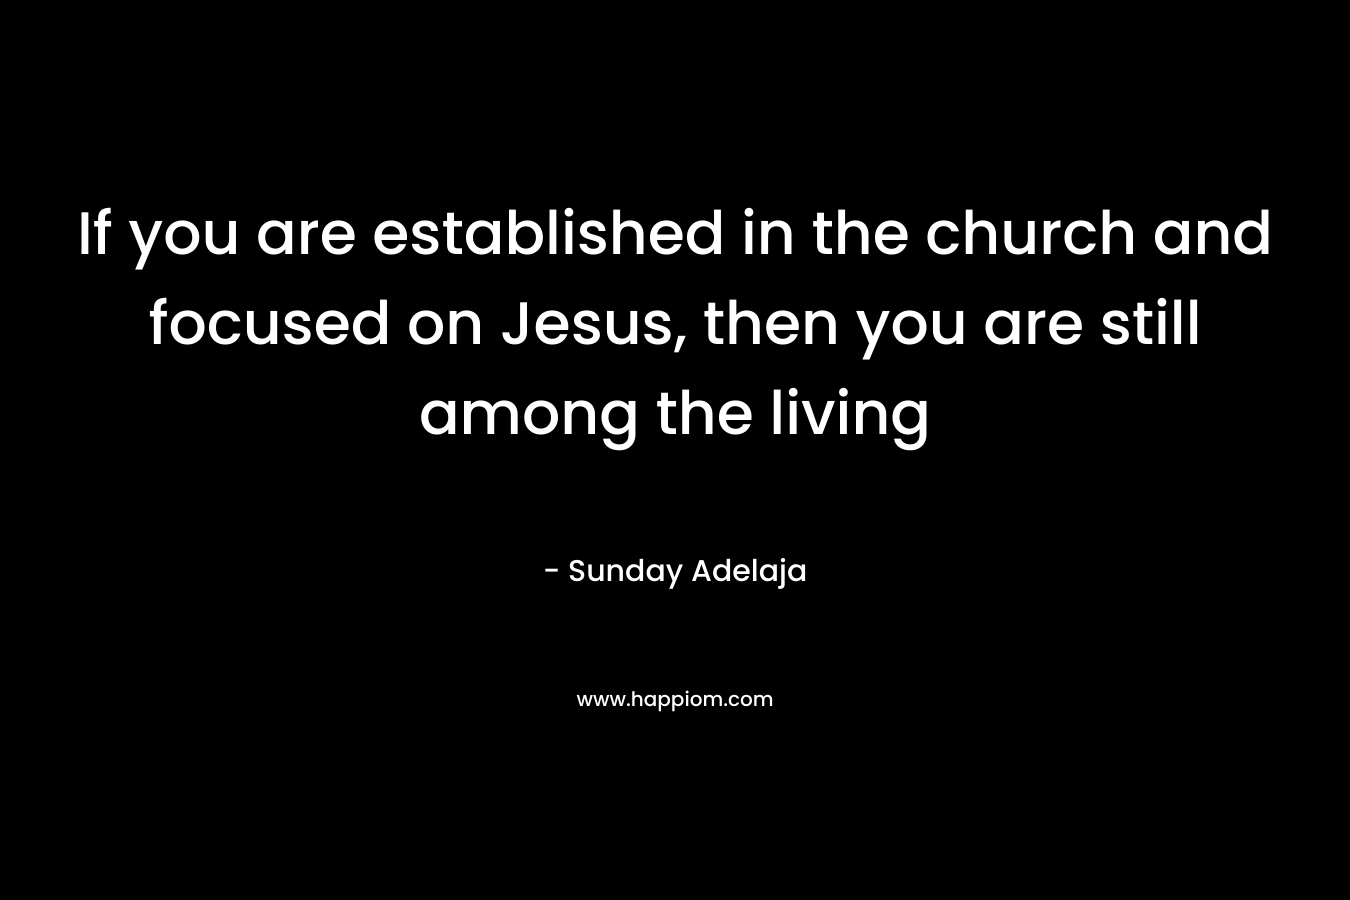 If you are established in the church and focused on Jesus, then you are still among the living